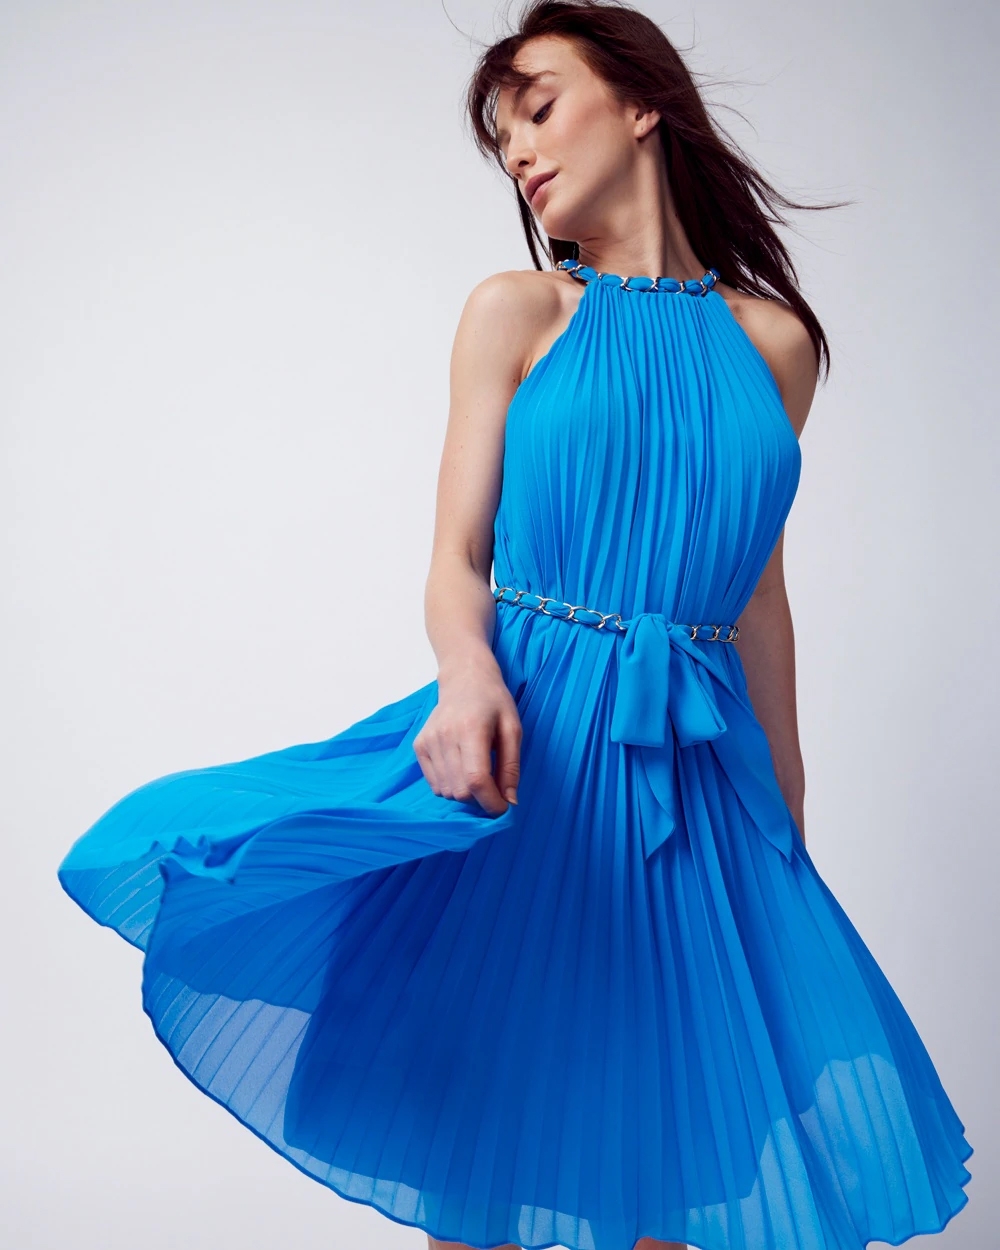 Electric-Blue-Capsule-Post-1000x1250_0004_Sleeveless-Pleated-Halter-Dress-With-Chain-Detail.jpg